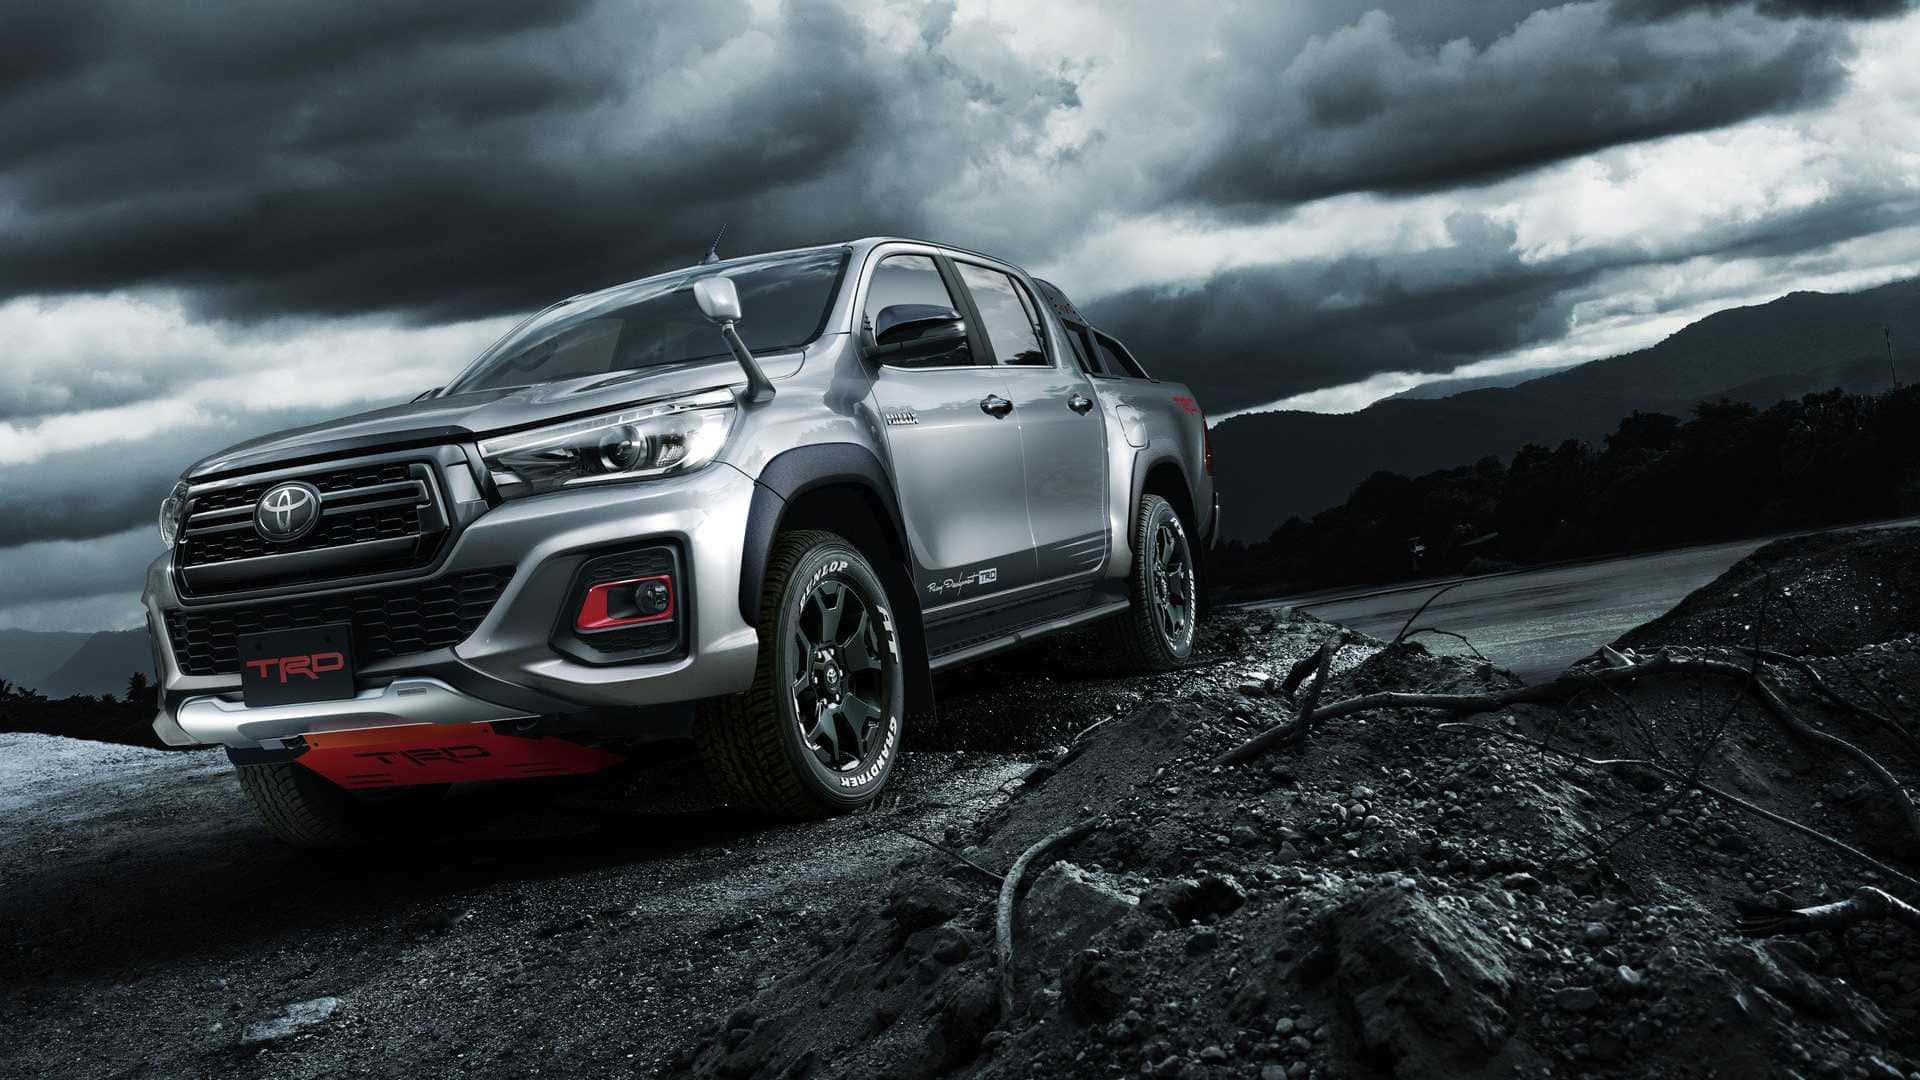 "A Powerful Adventure Begins In the Toyota TRD" Wallpaper